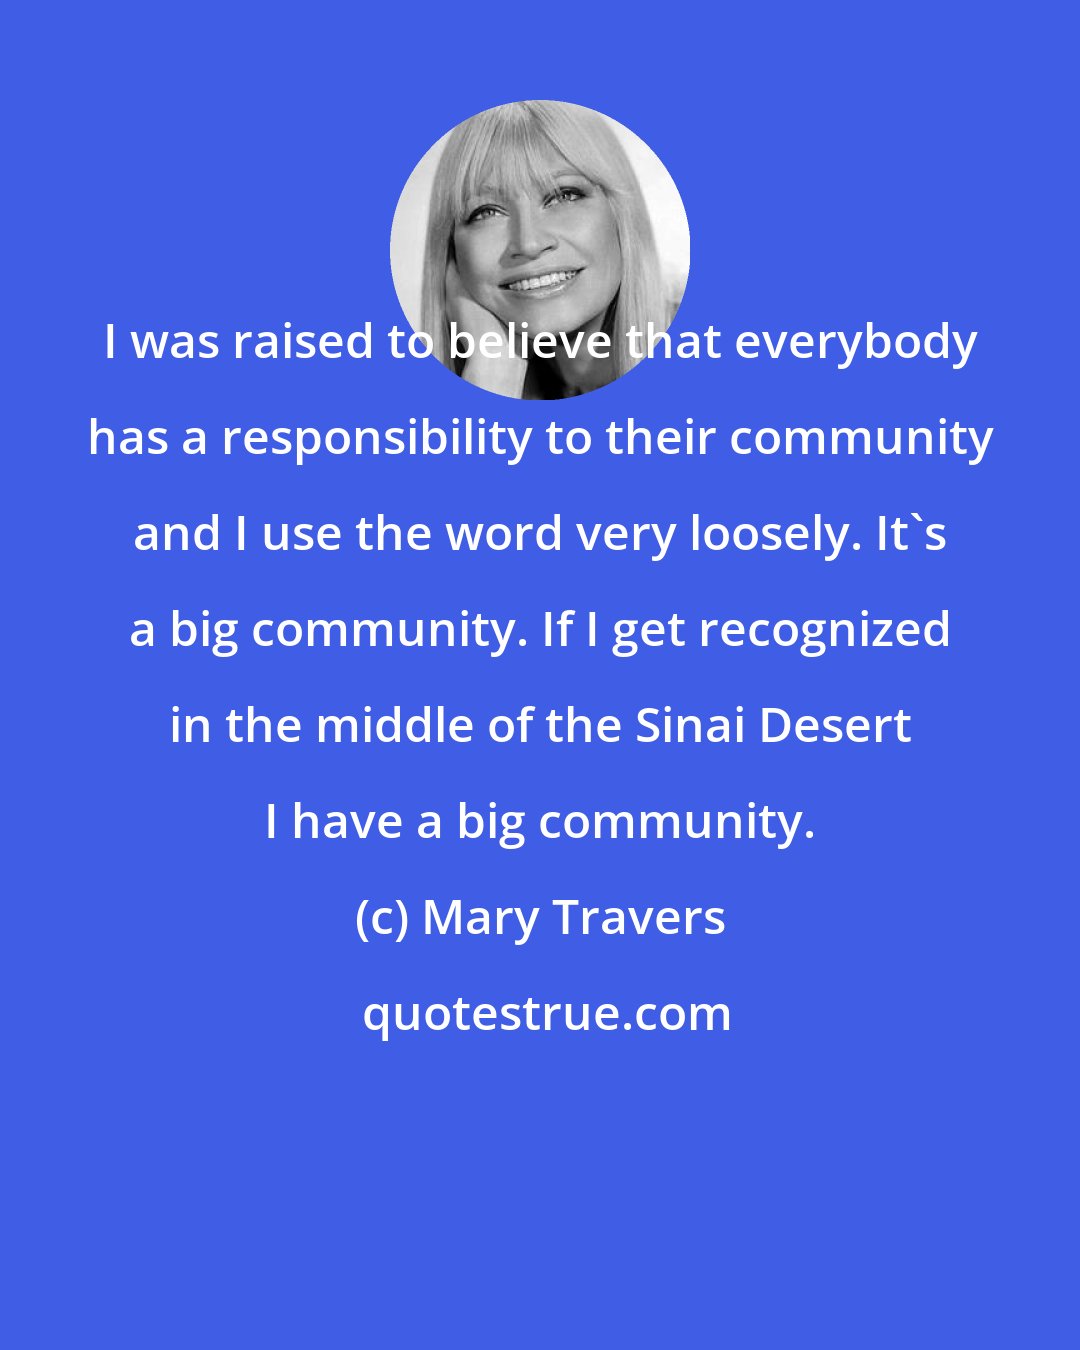 Mary Travers: I was raised to believe that everybody has a responsibility to their community and I use the word very loosely. It's a big community. If I get recognized in the middle of the Sinai Desert I have a big community.